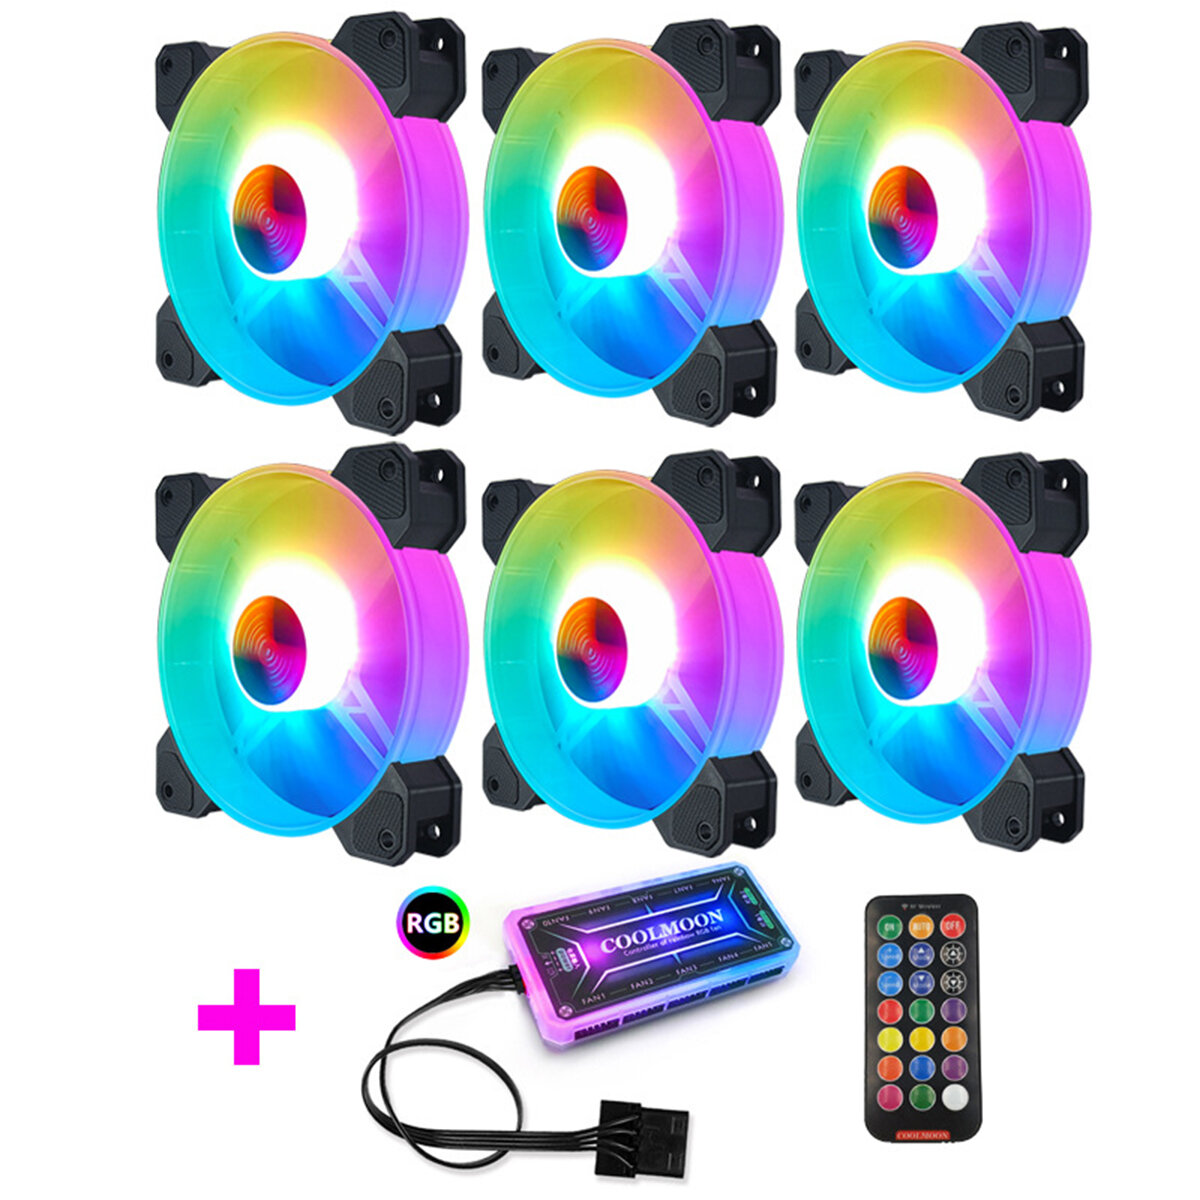 best price,coolmoon,fan,cooler,rgb,12v,6pin,120mm,6pcs,discount